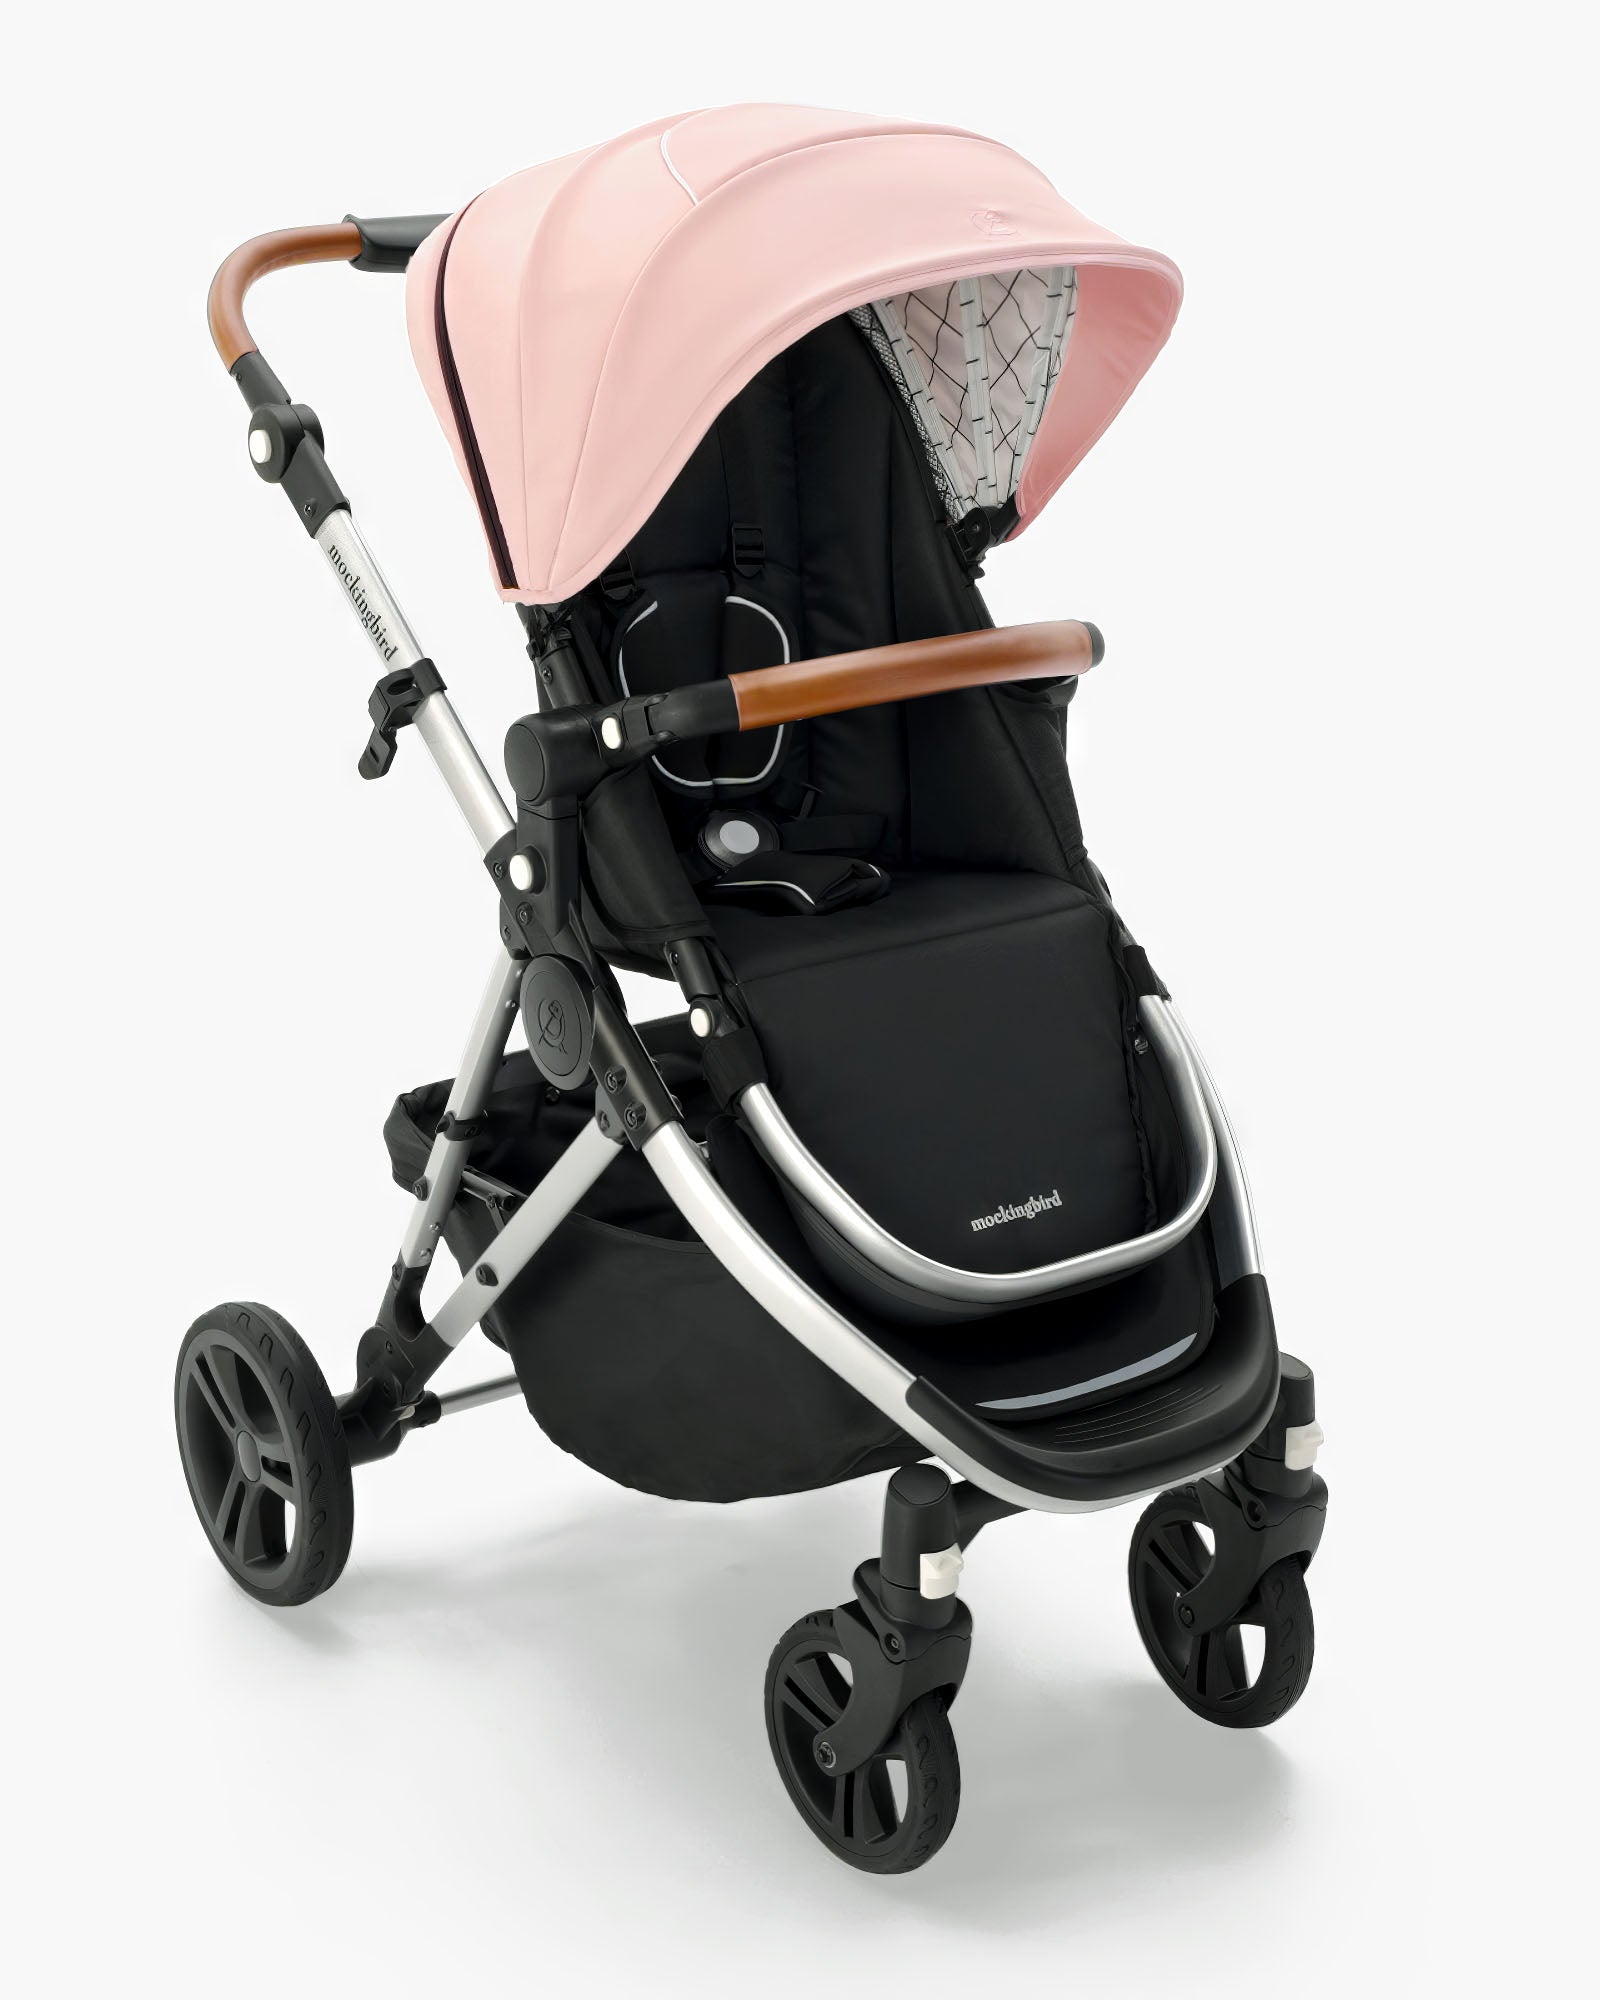 Mockingbird Single Stroller 2.0 baby stroller with pink canopy, black seat, and gray frame, shown on a white background. #color_bloom